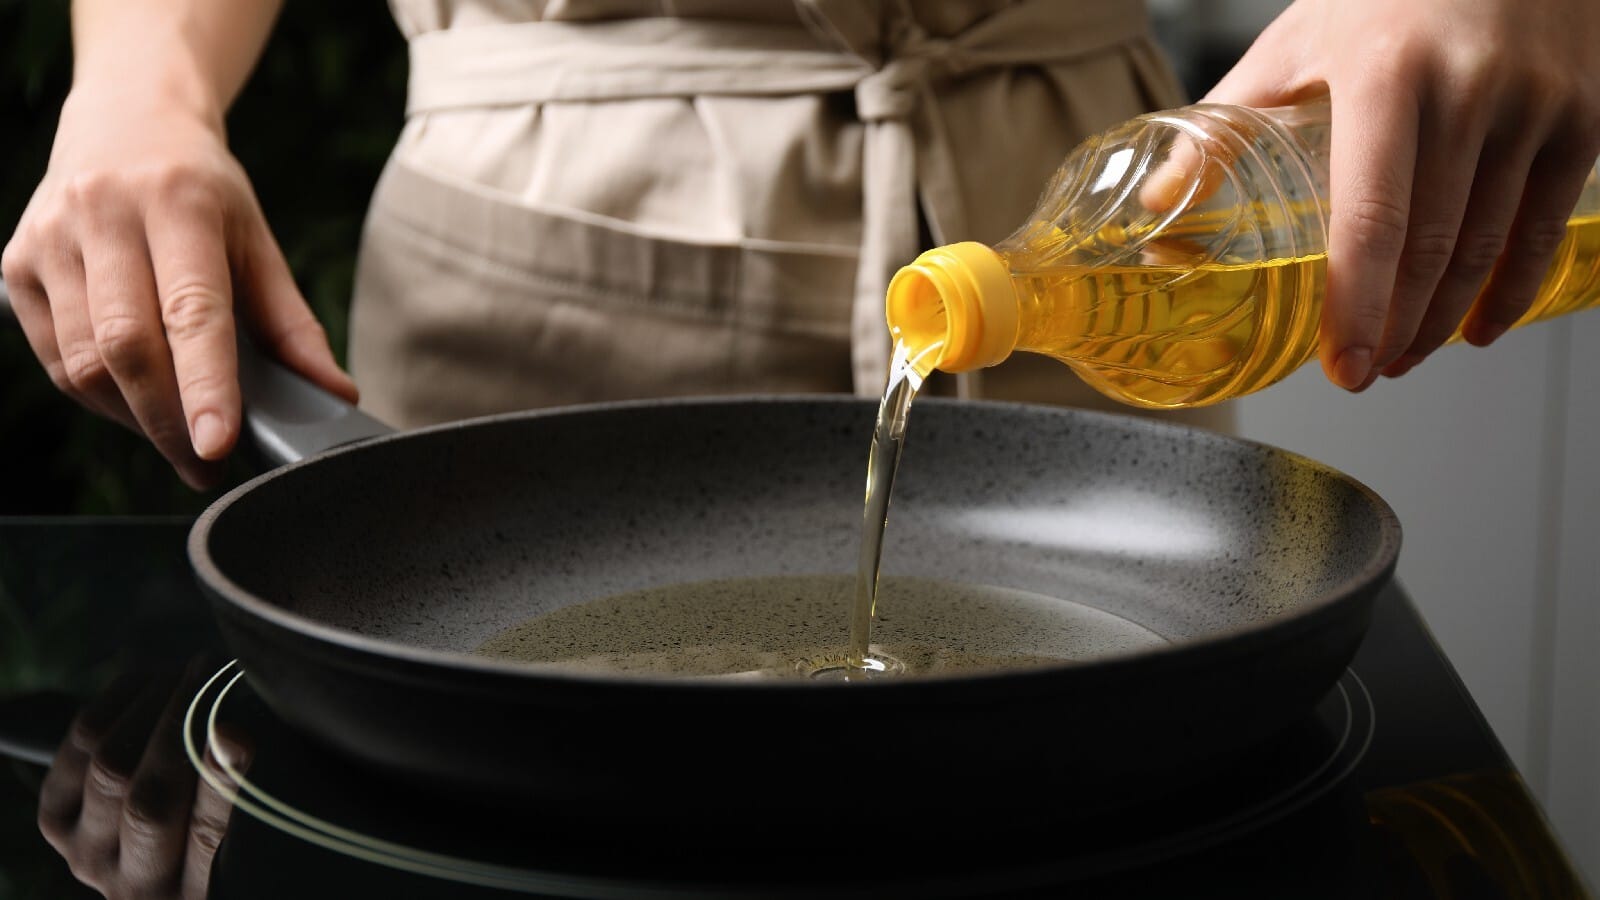 Used Cooking Oil Side Effects in Tamil